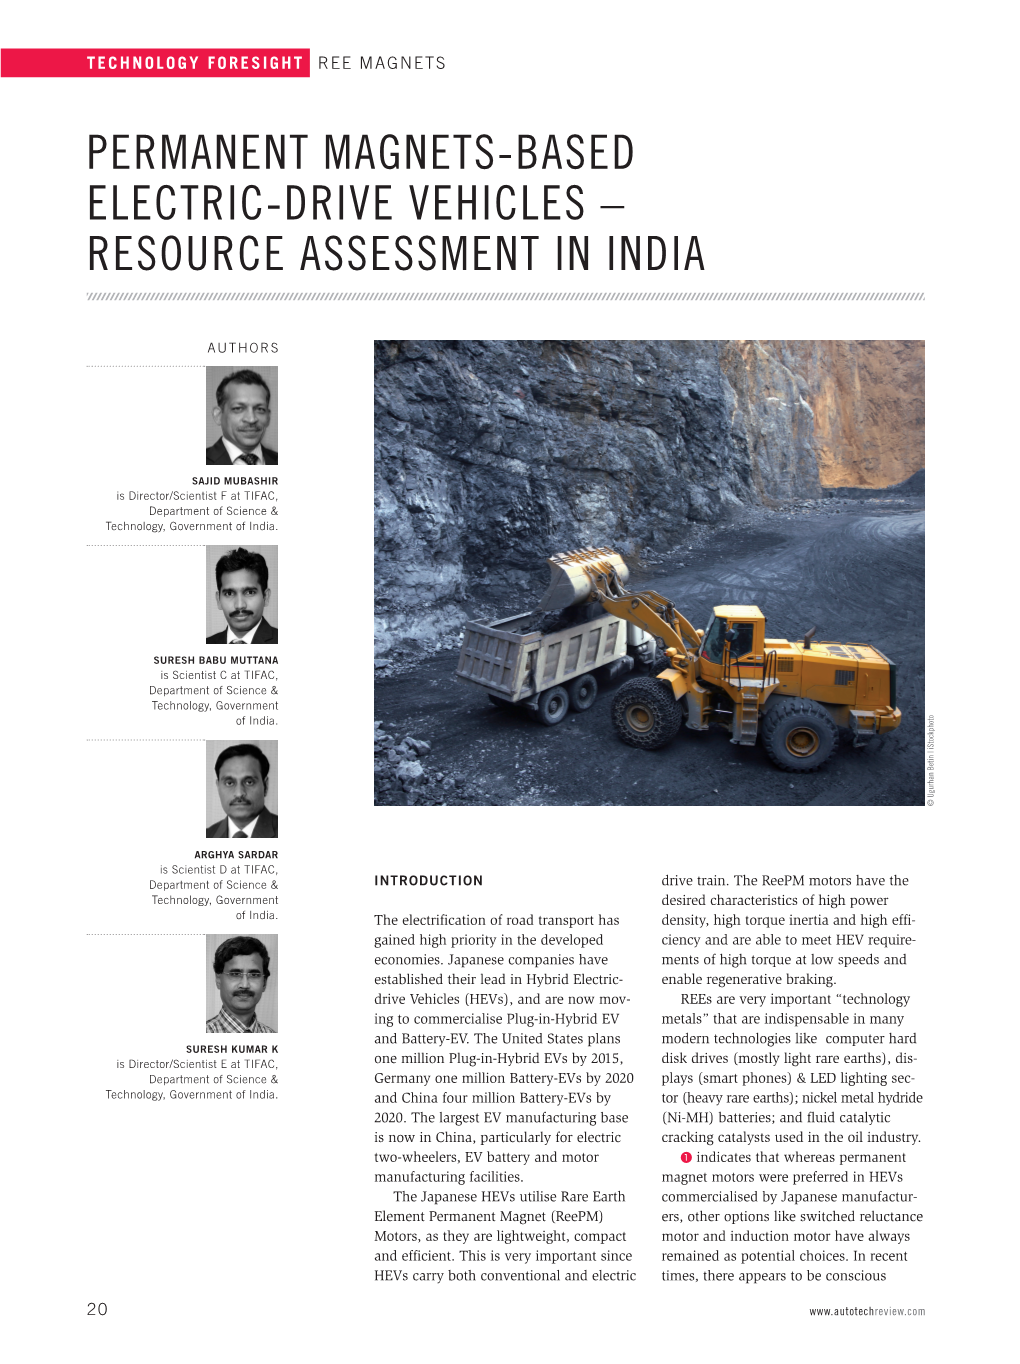 Permanent Magnets-Based Electric-Drive Vehicles – Resource Assessment in India